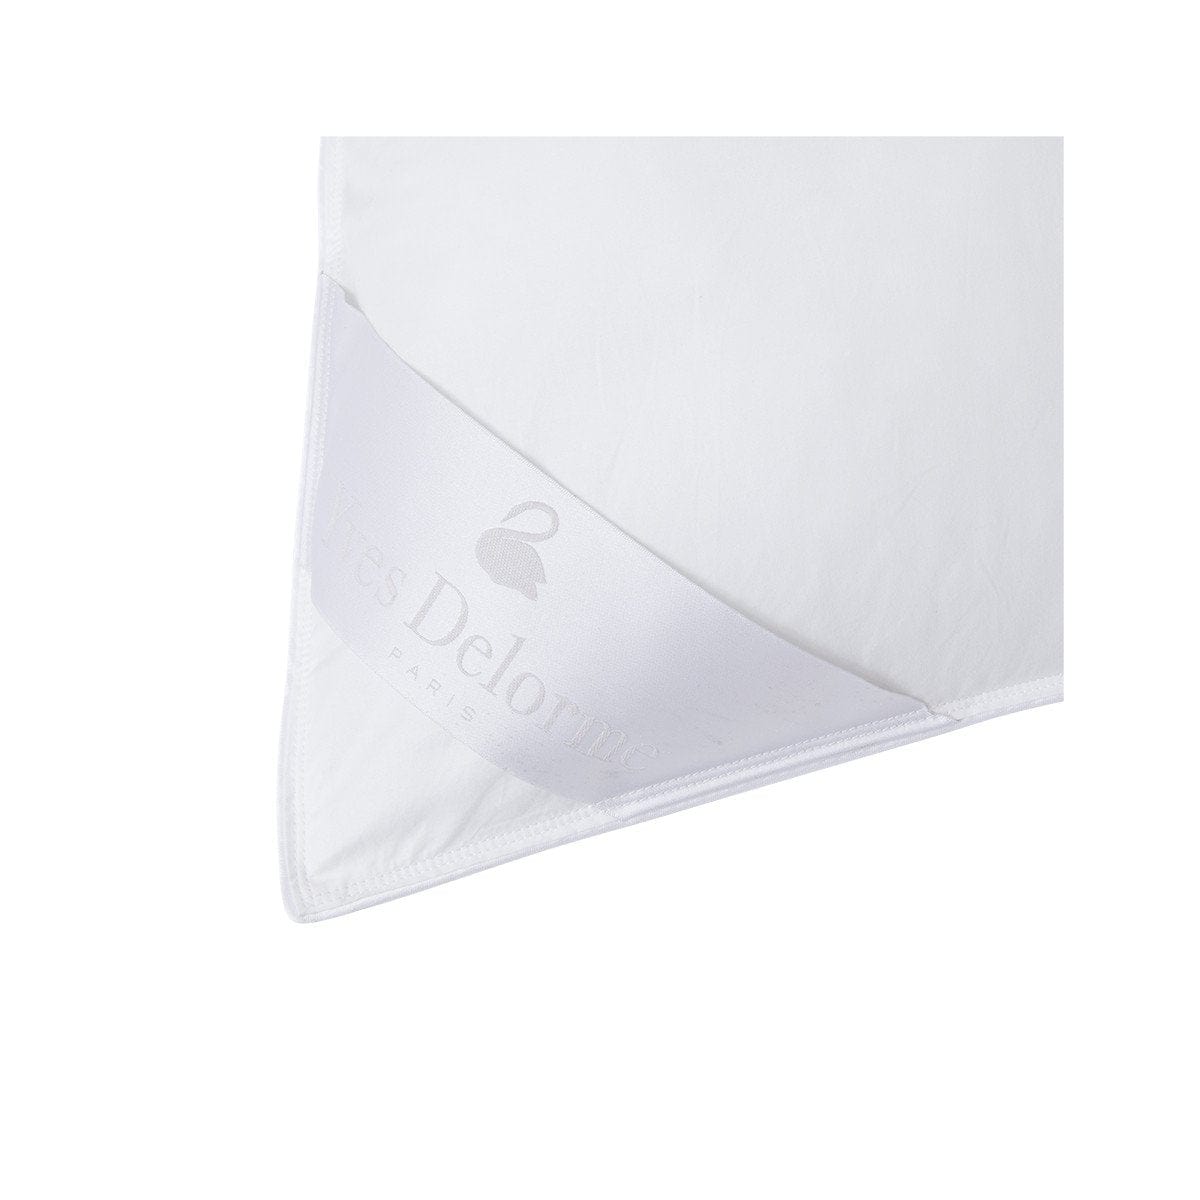 Pillows Actuel (Anti-Allergy) Soft Pillow by Yves Delorme Yves Delorme